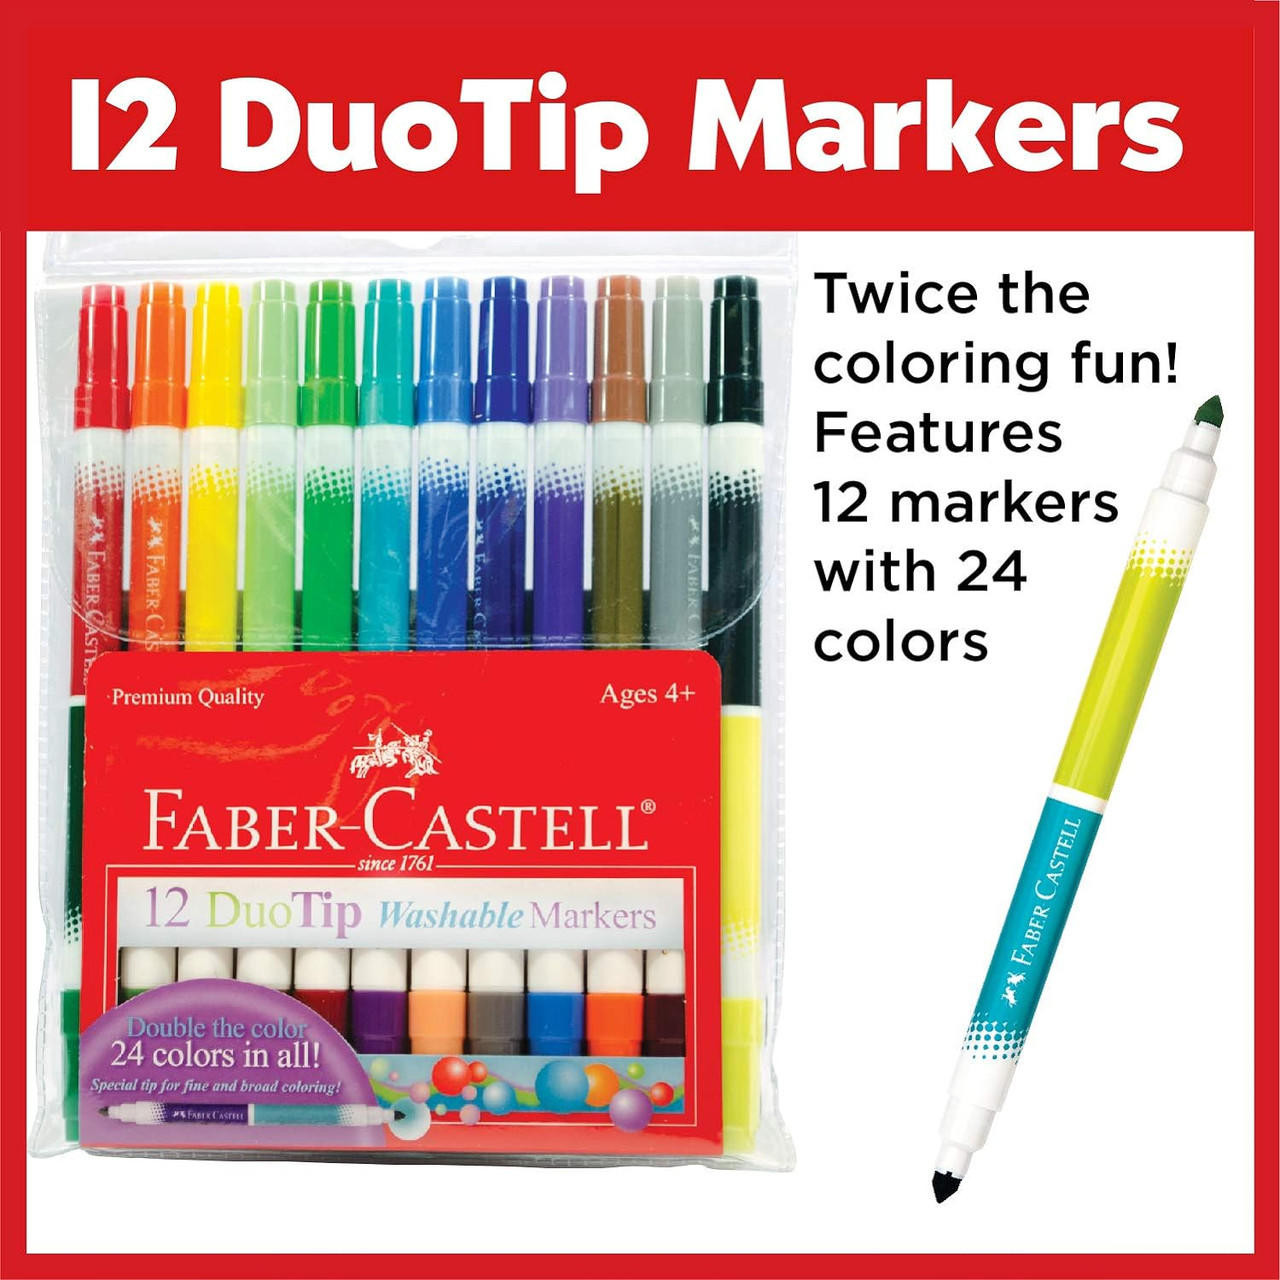 https://cdn11.bigcommerce.com/s-9uf88xhege/images/stencil/1280x1280/products/10895/99833/faber-castell-duotip-washable-markers-12-markers__89459.1700033045.jpg?c=1?imbypass=on